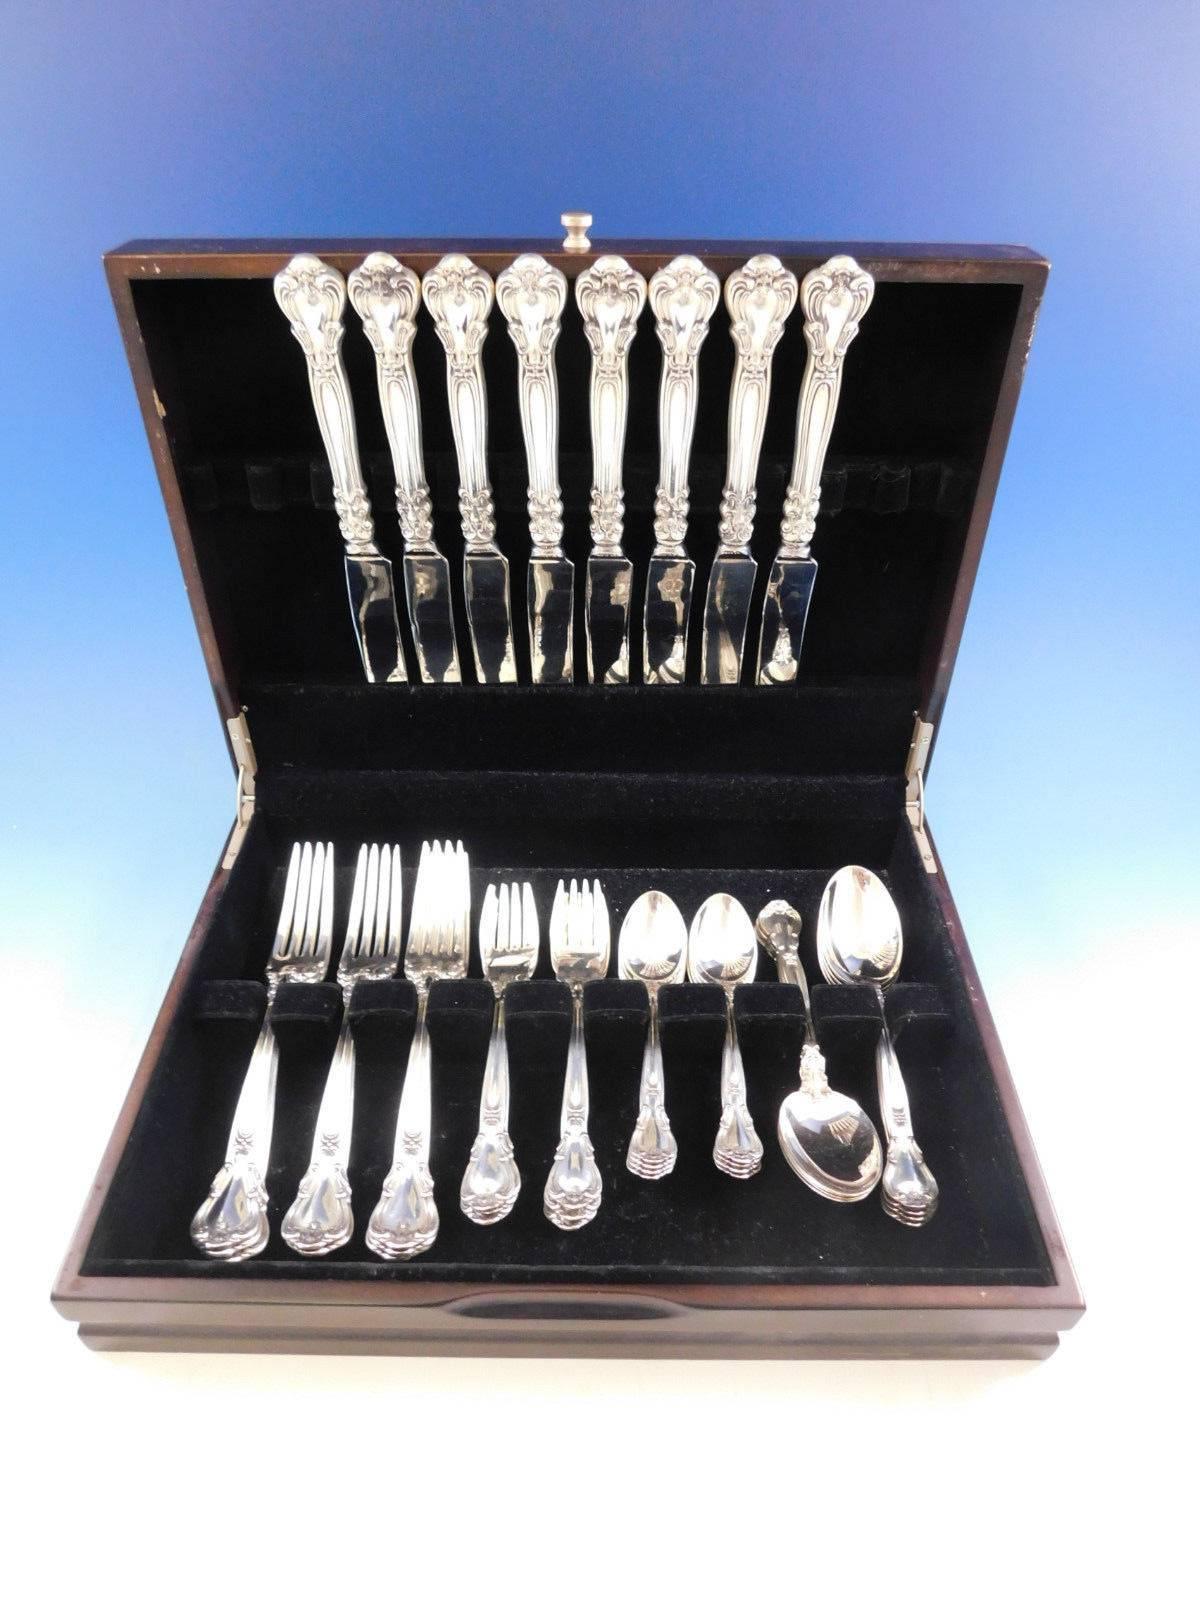 Rare continental size Chantilly by Gorham sterling silver flatware set, 40 pieces. Continental size is scarce, circa 1990s, and refers to the overall larger size of flatware that is popular in European countries. It is marked by massively large